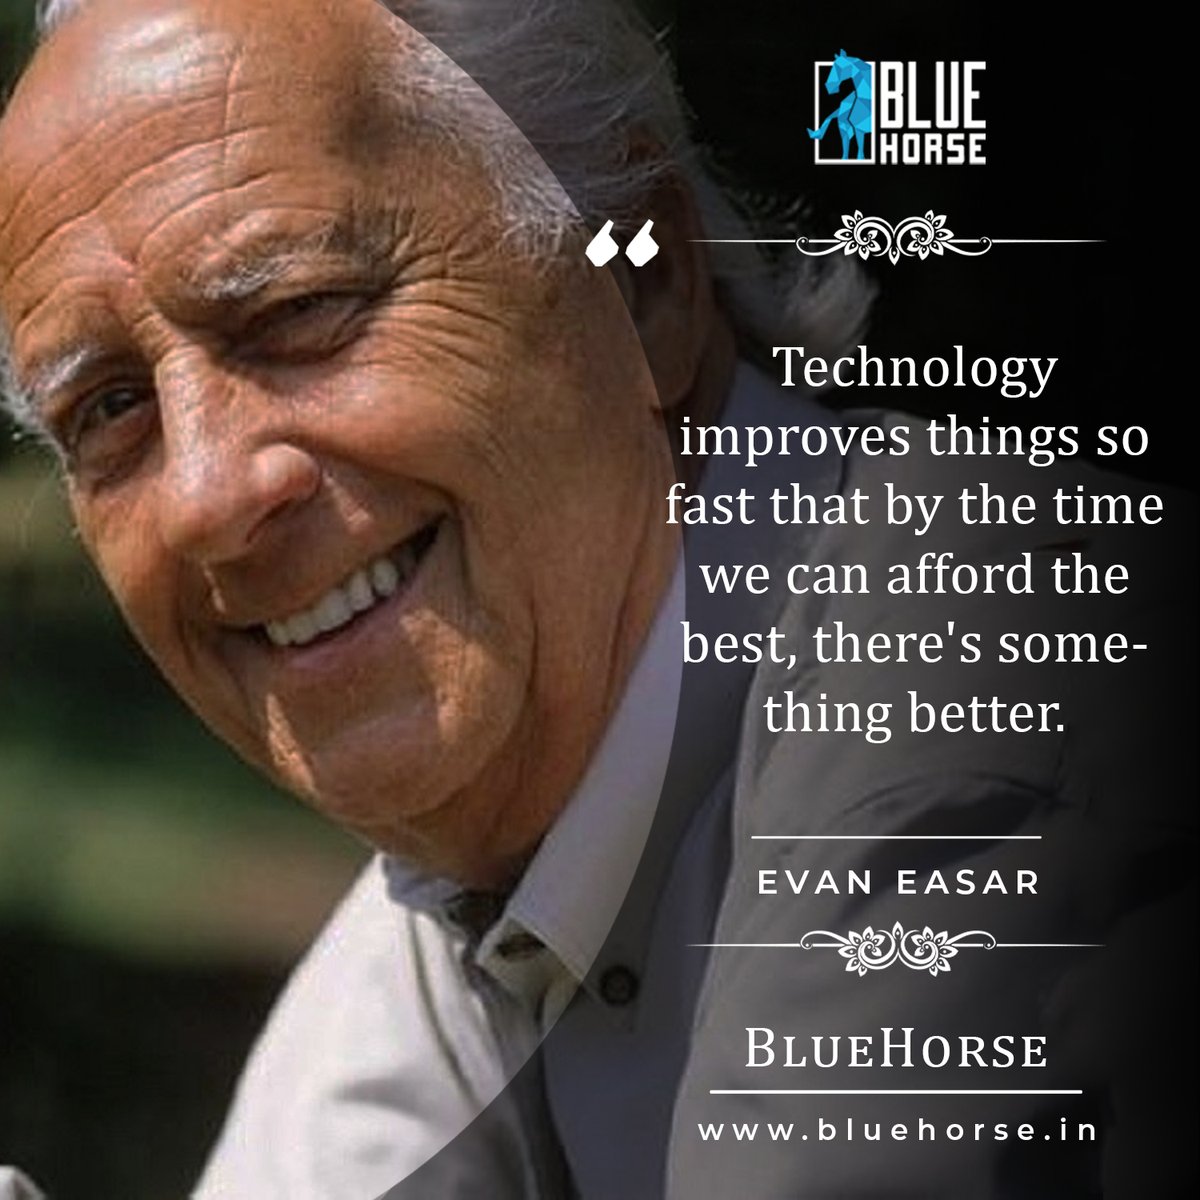 'Technology improves things so fast that by the time we can afford the best, there's something better.'
EVAN ESAR
#EvanEsar #technology #techquote #bluehorse #bluehorsesoftware